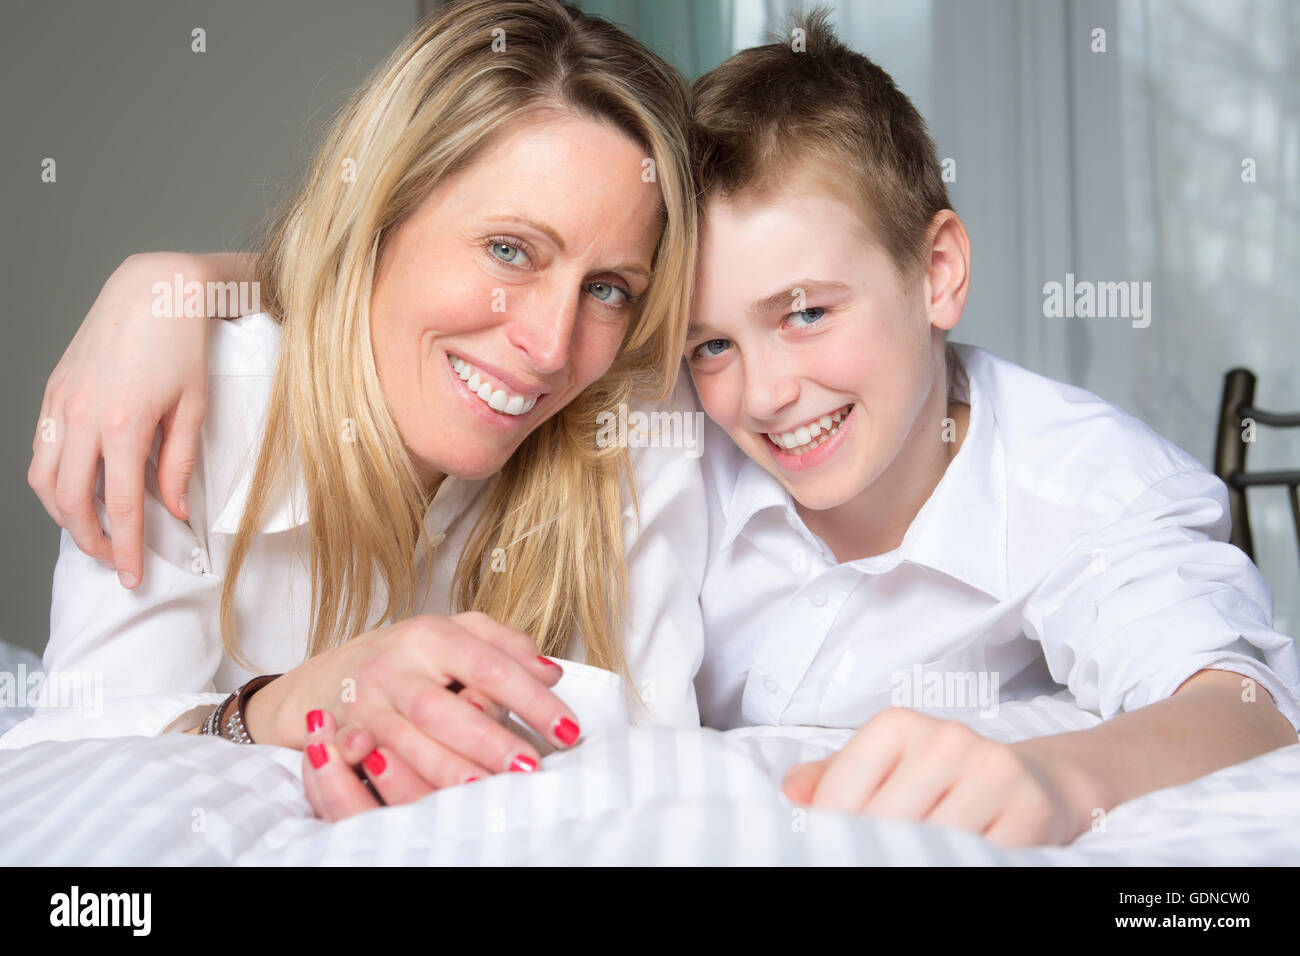 Mother And Son Relaxing Together In Bed Stock Photo